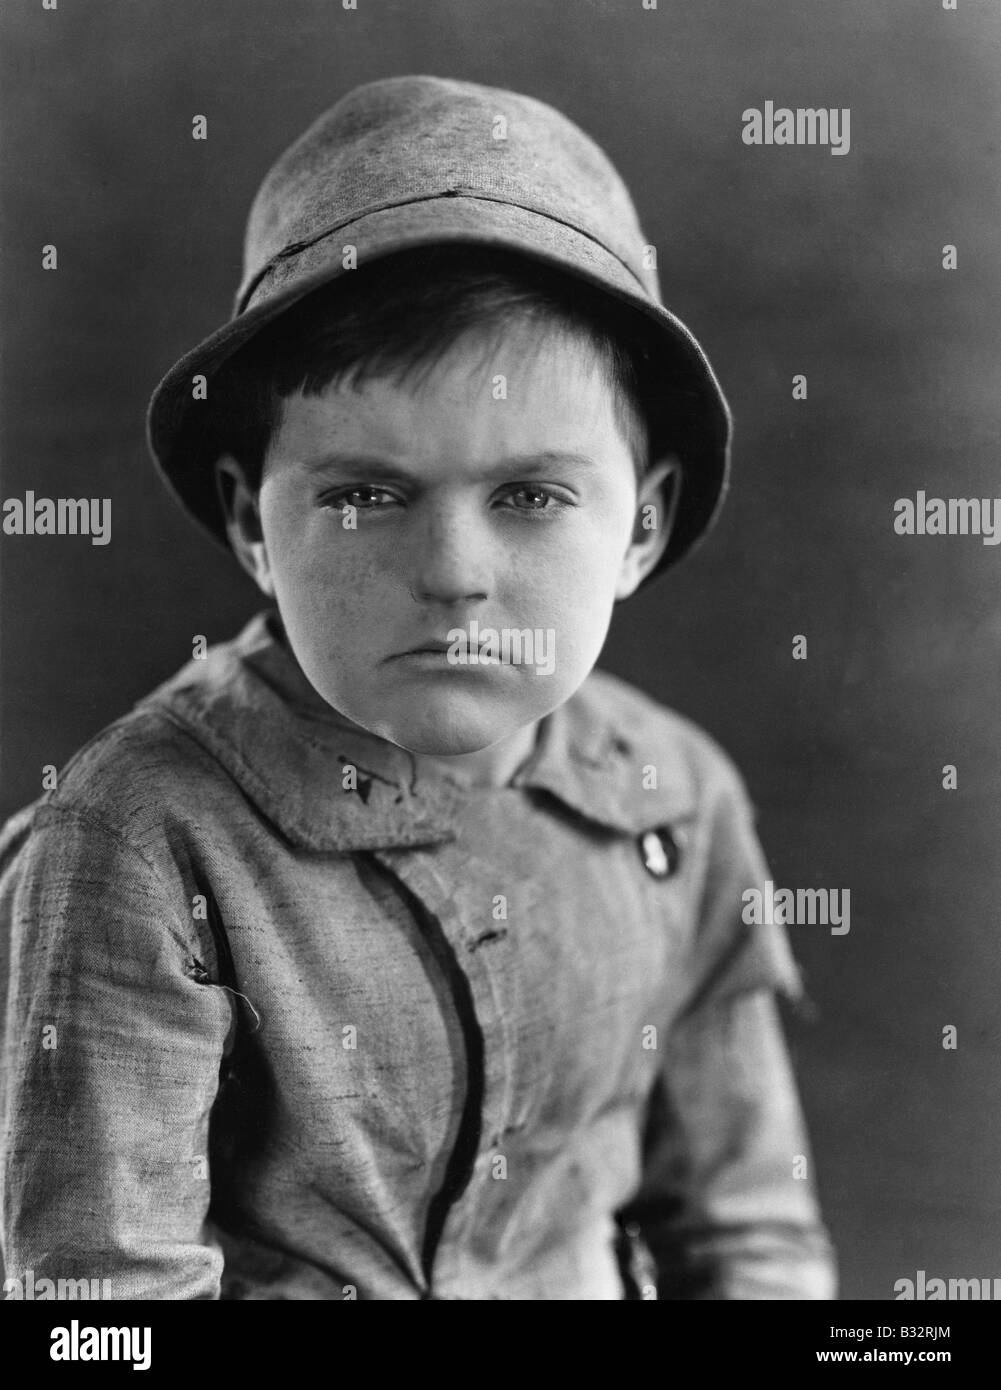 Portrait of a boy looking serious Stock Photo - Alamy